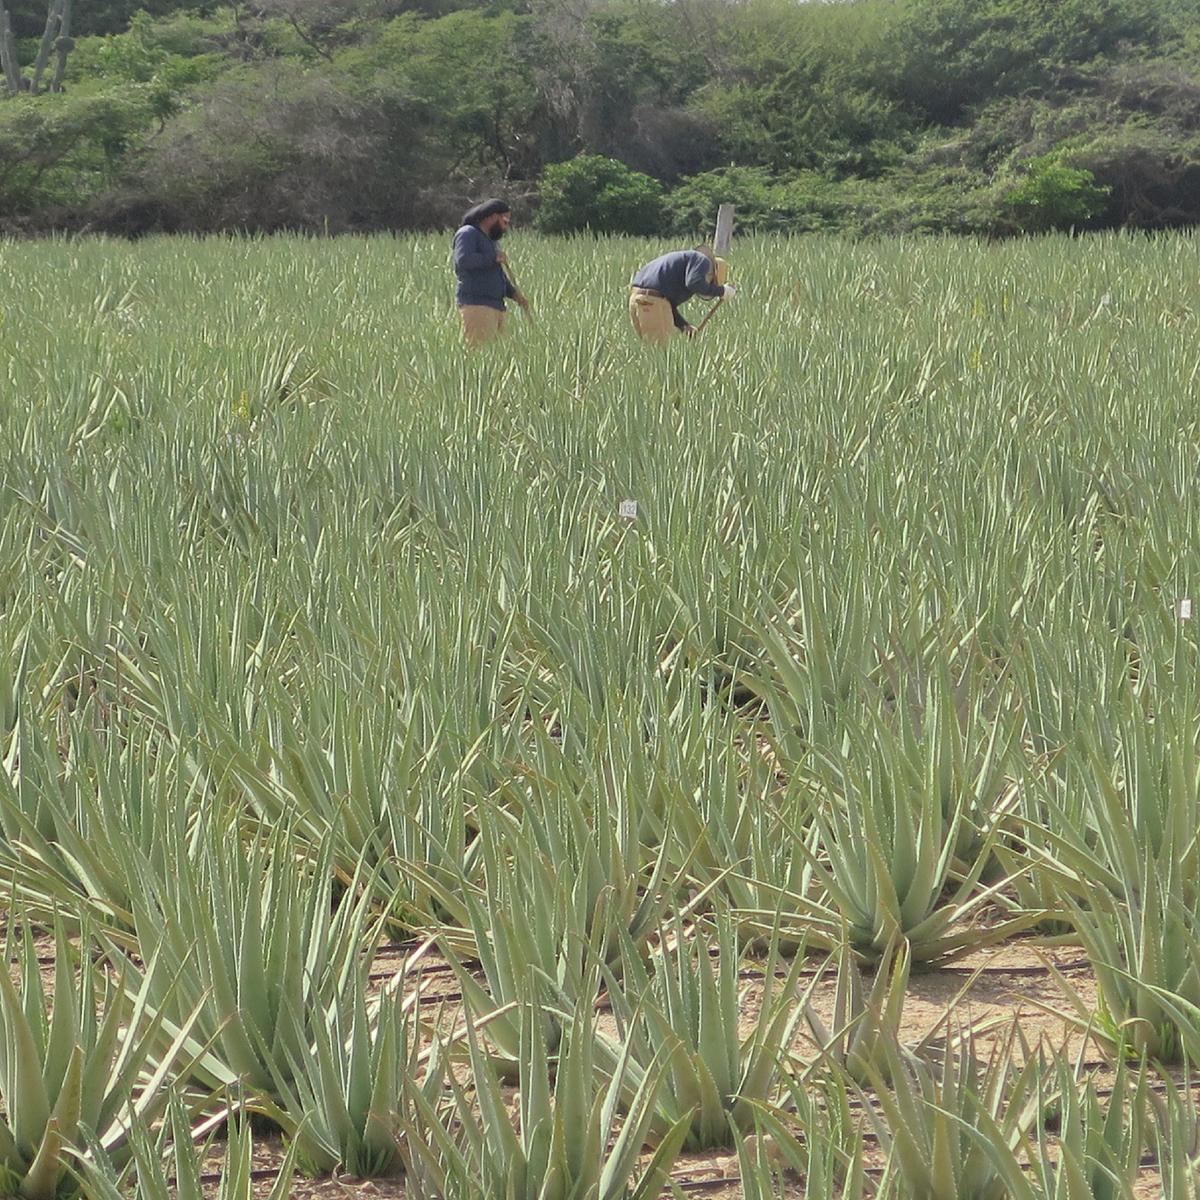 Workers at the Aloe Museum and Factory in Aruba use machetes to harvest aloe. (Photo courtesy of Victor Block)